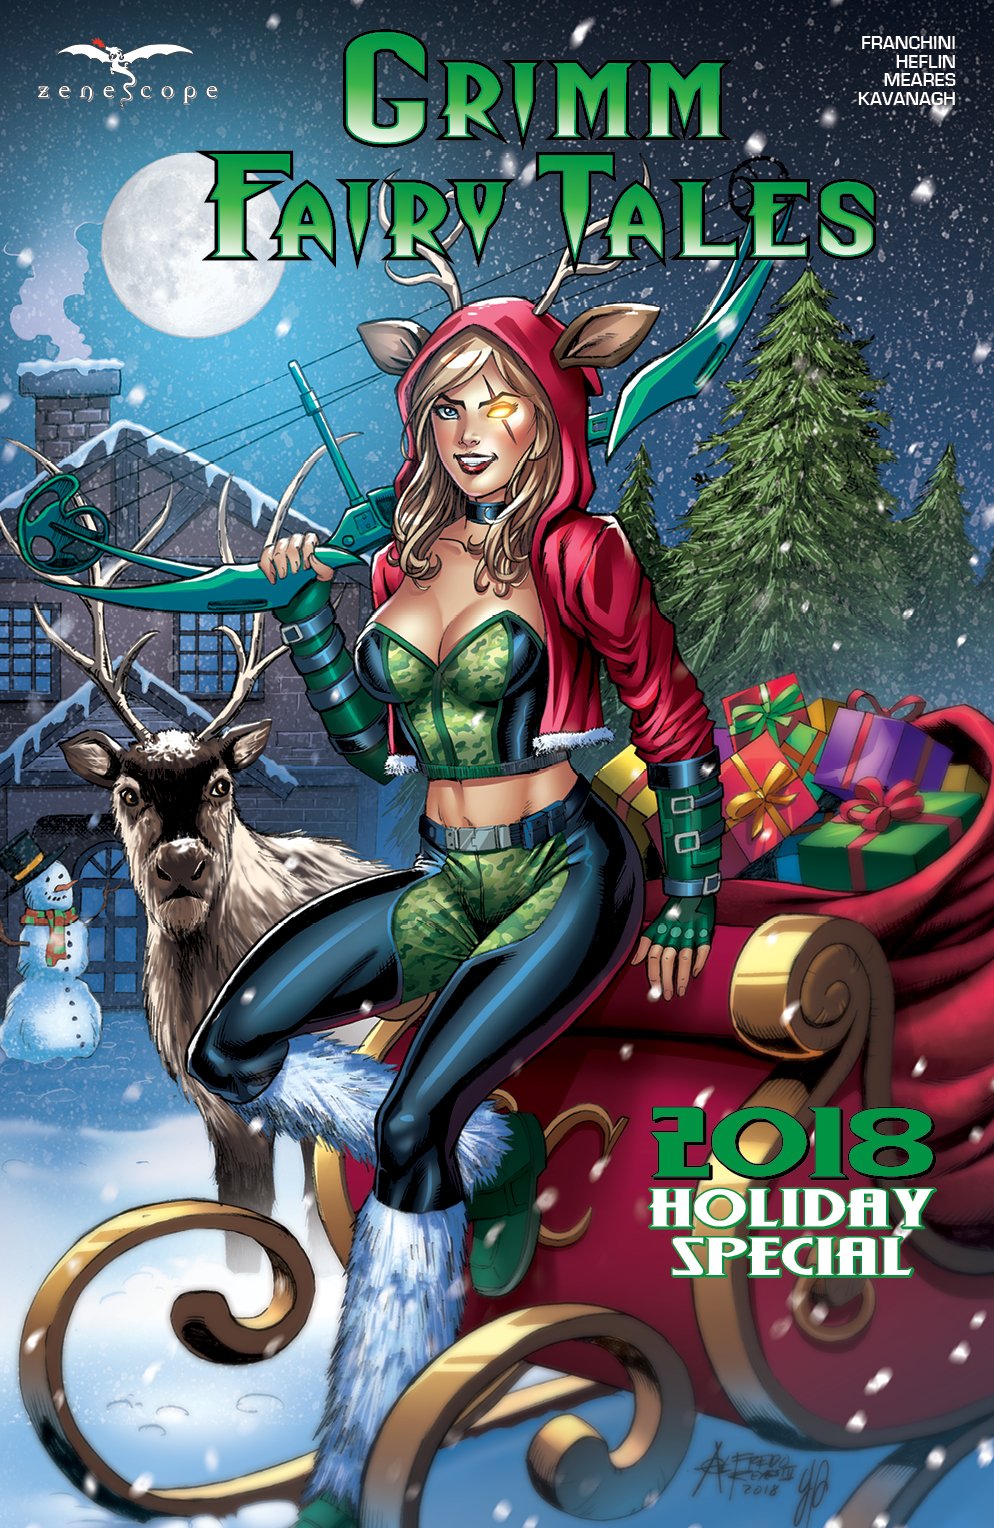 Image of Grimm Fairy Tales 2018 Holiday Special